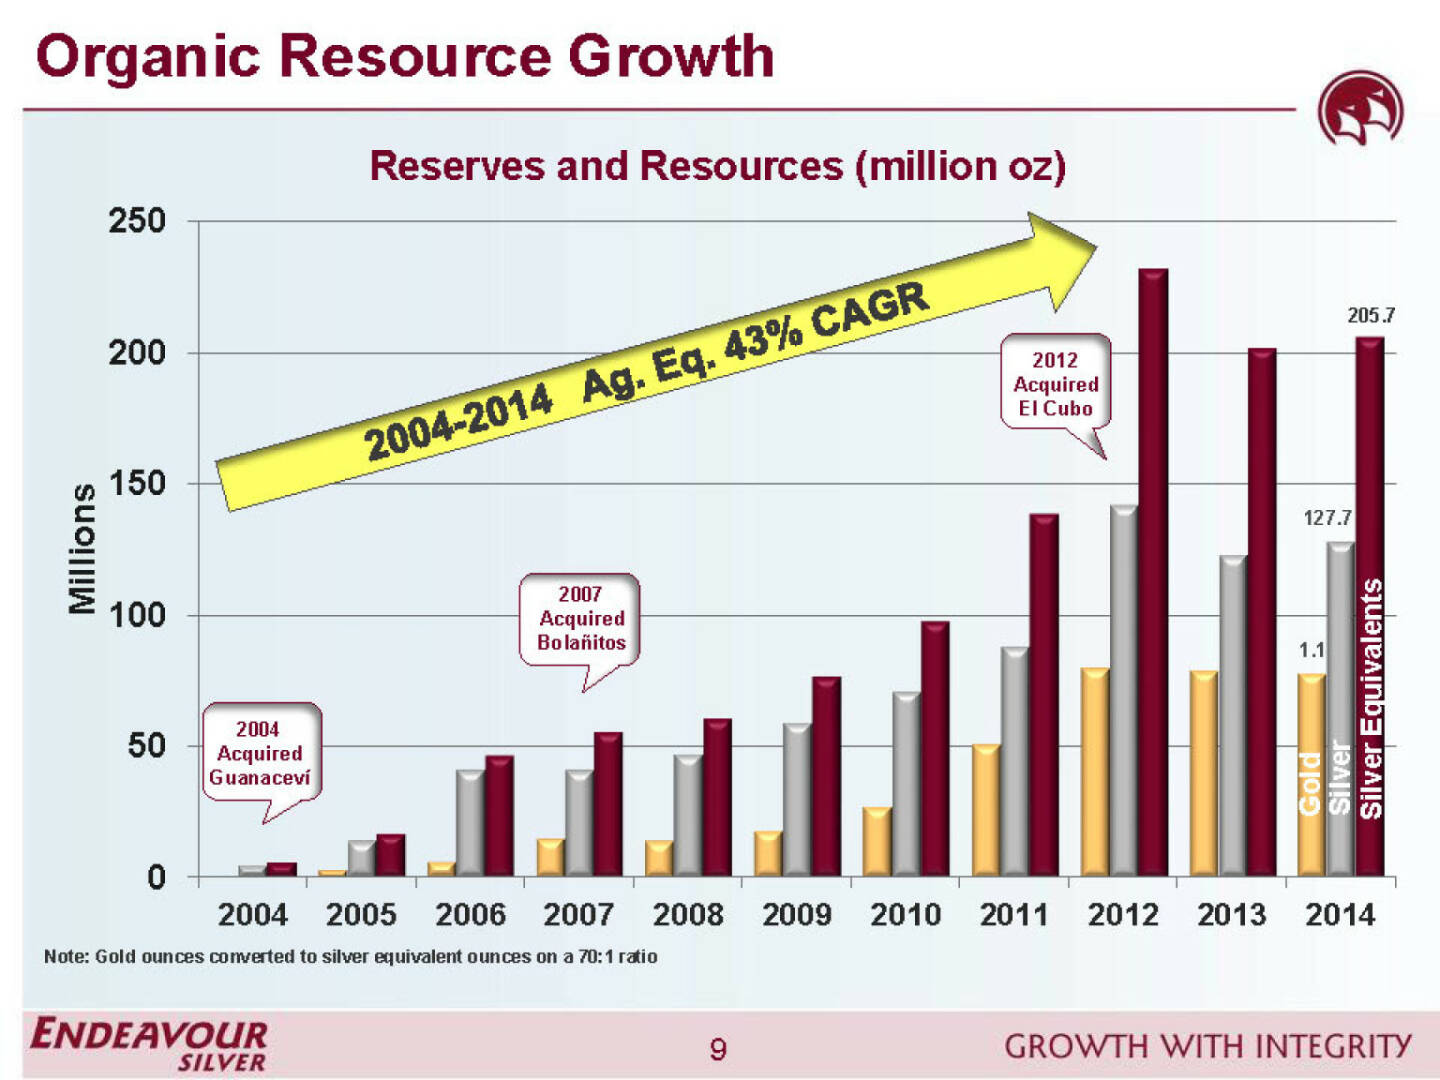 Oragnic resource growth - Endeavour Silver